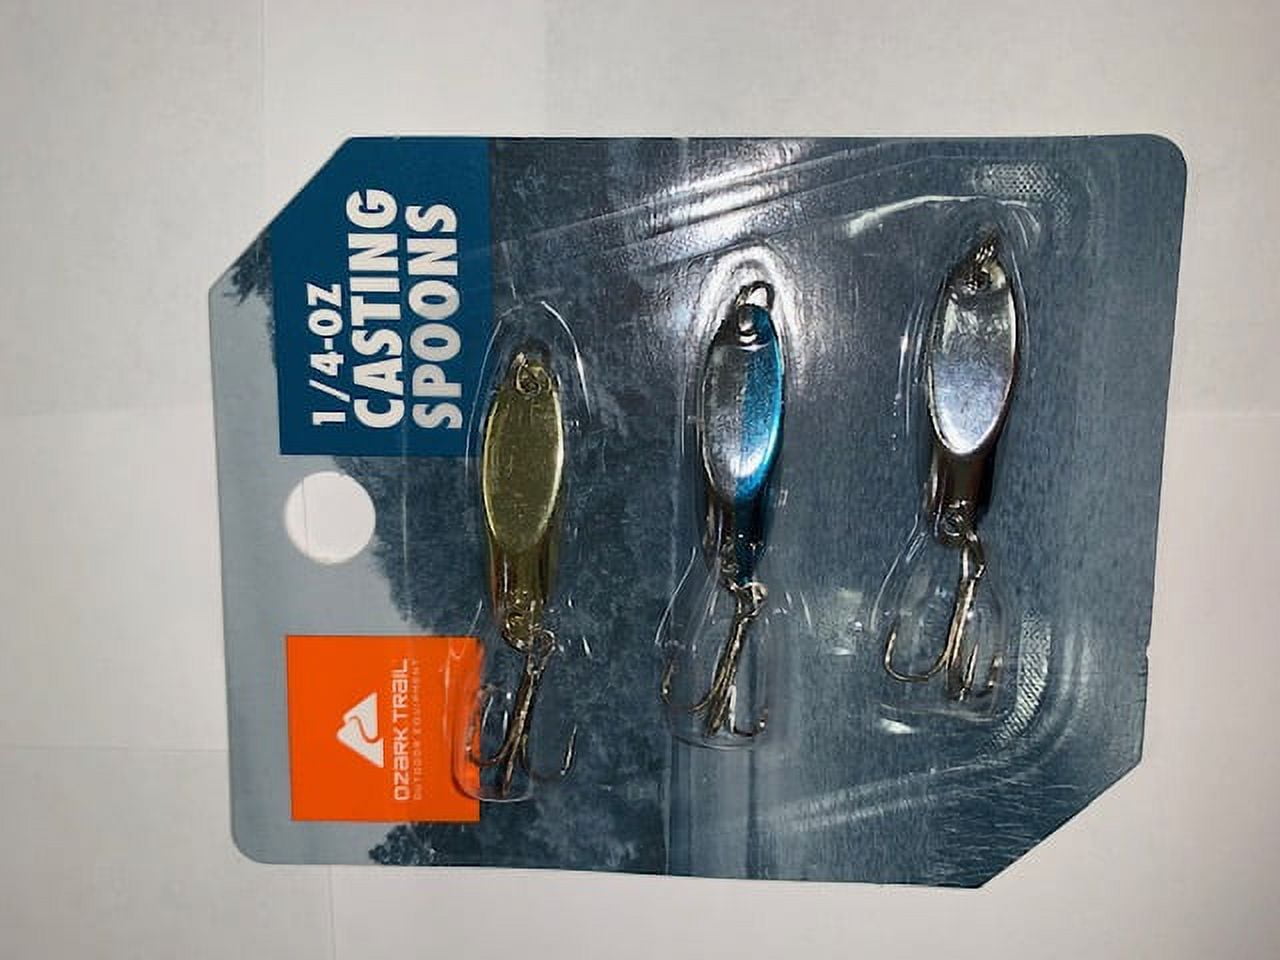 Ozark Trail Casting Spoons Fishing Lures, Assorted Colors, 1/4 Oz., 3  Count, OZ14CS 